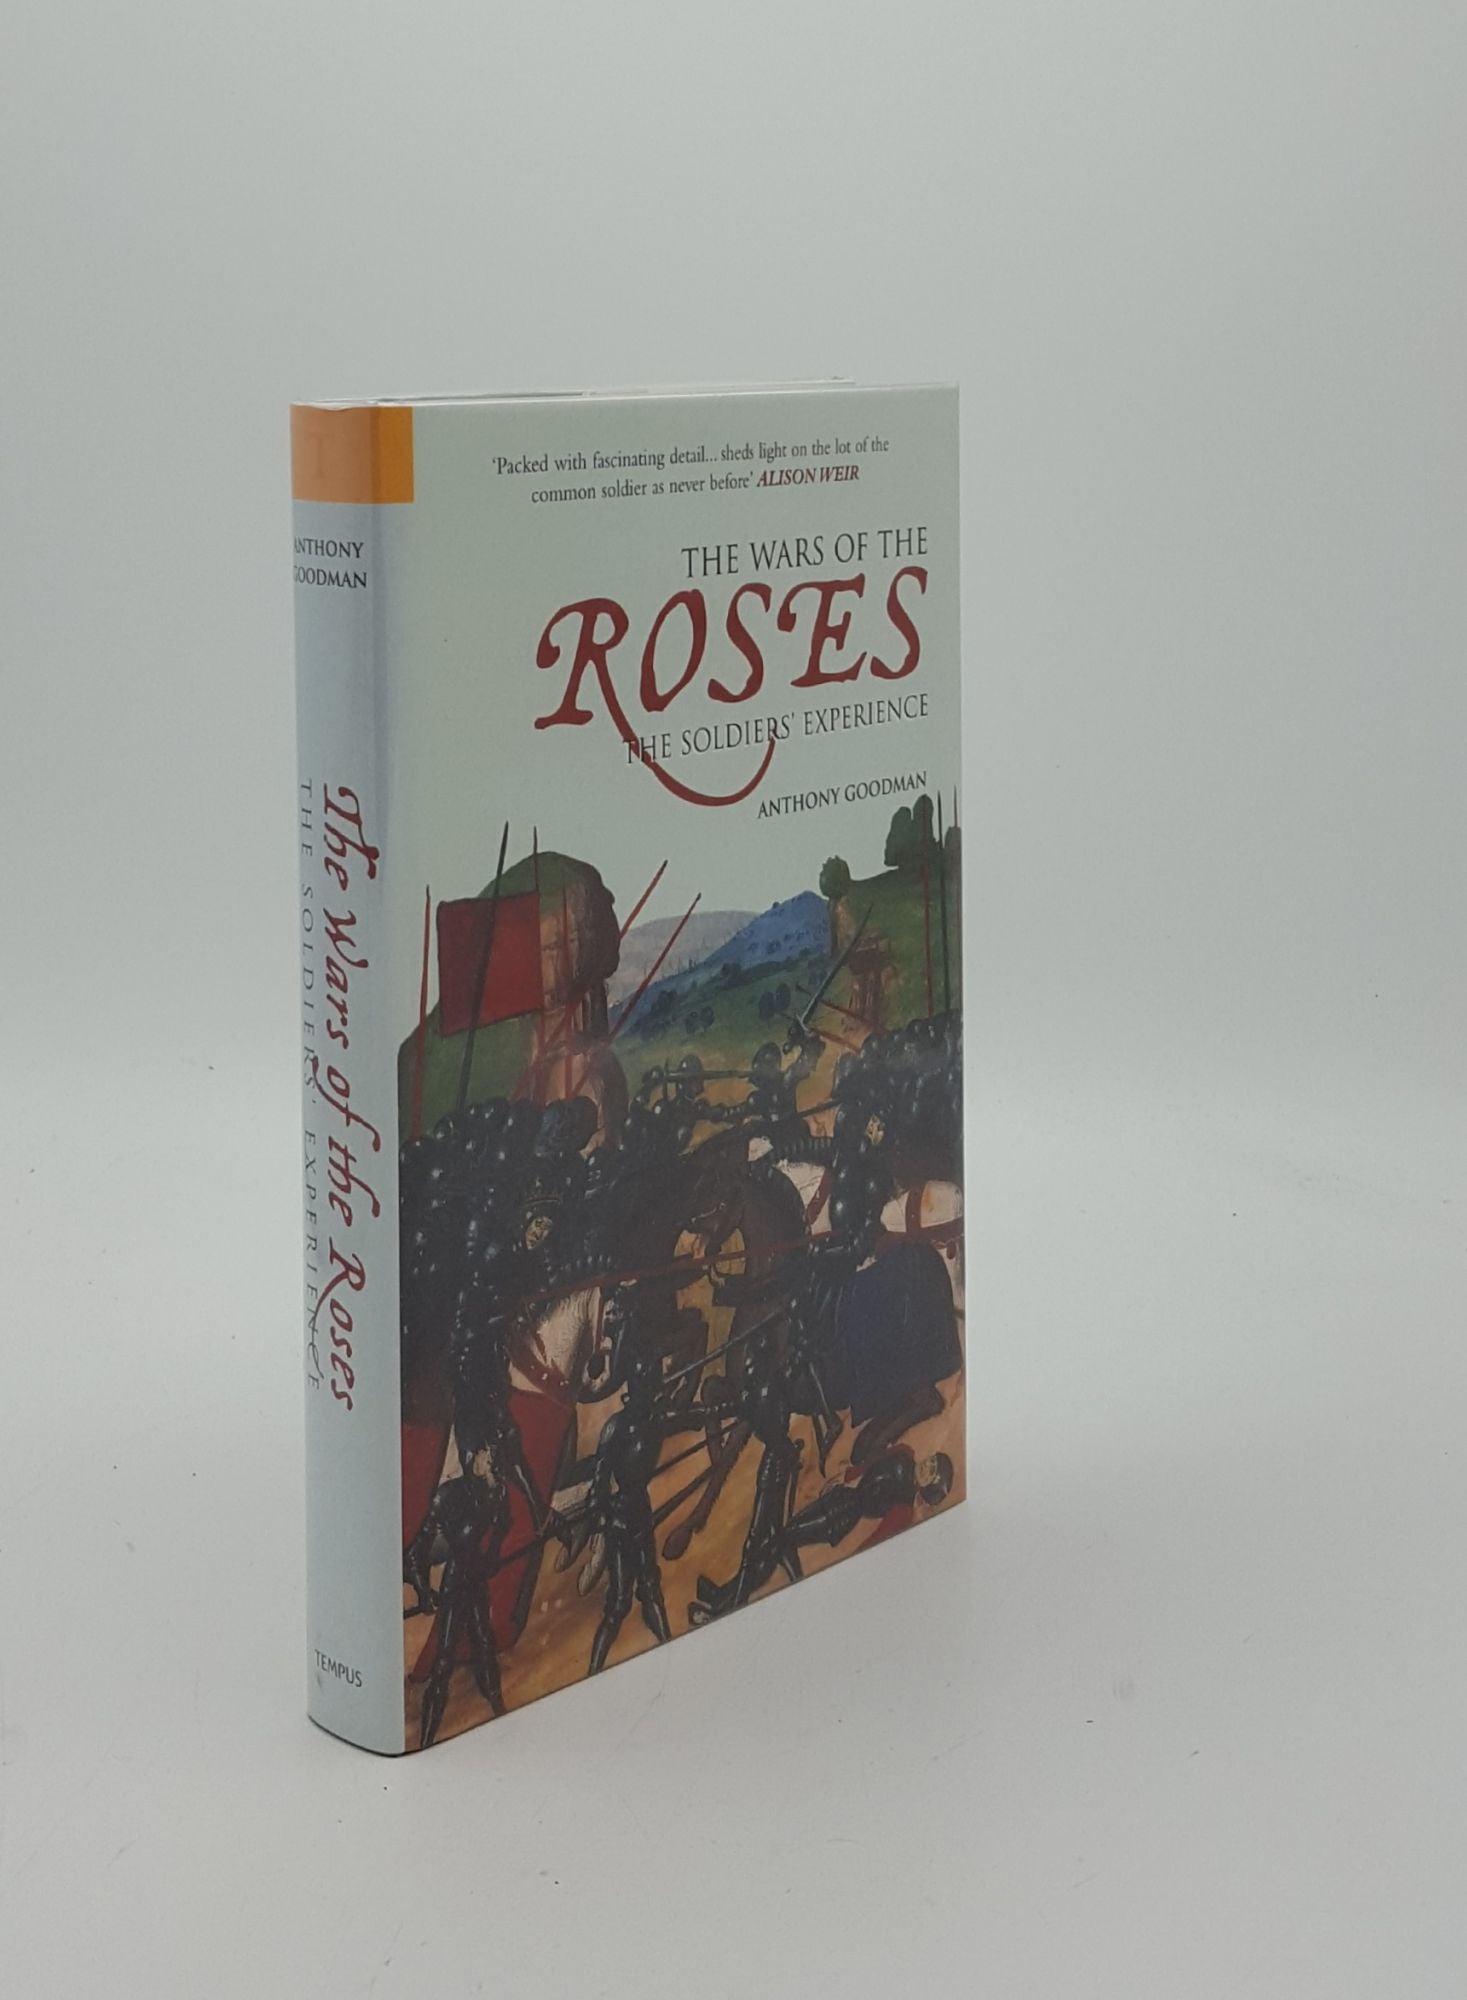 GOODMAN Anthony - The Wars of the Roses the Soldiers' Experience